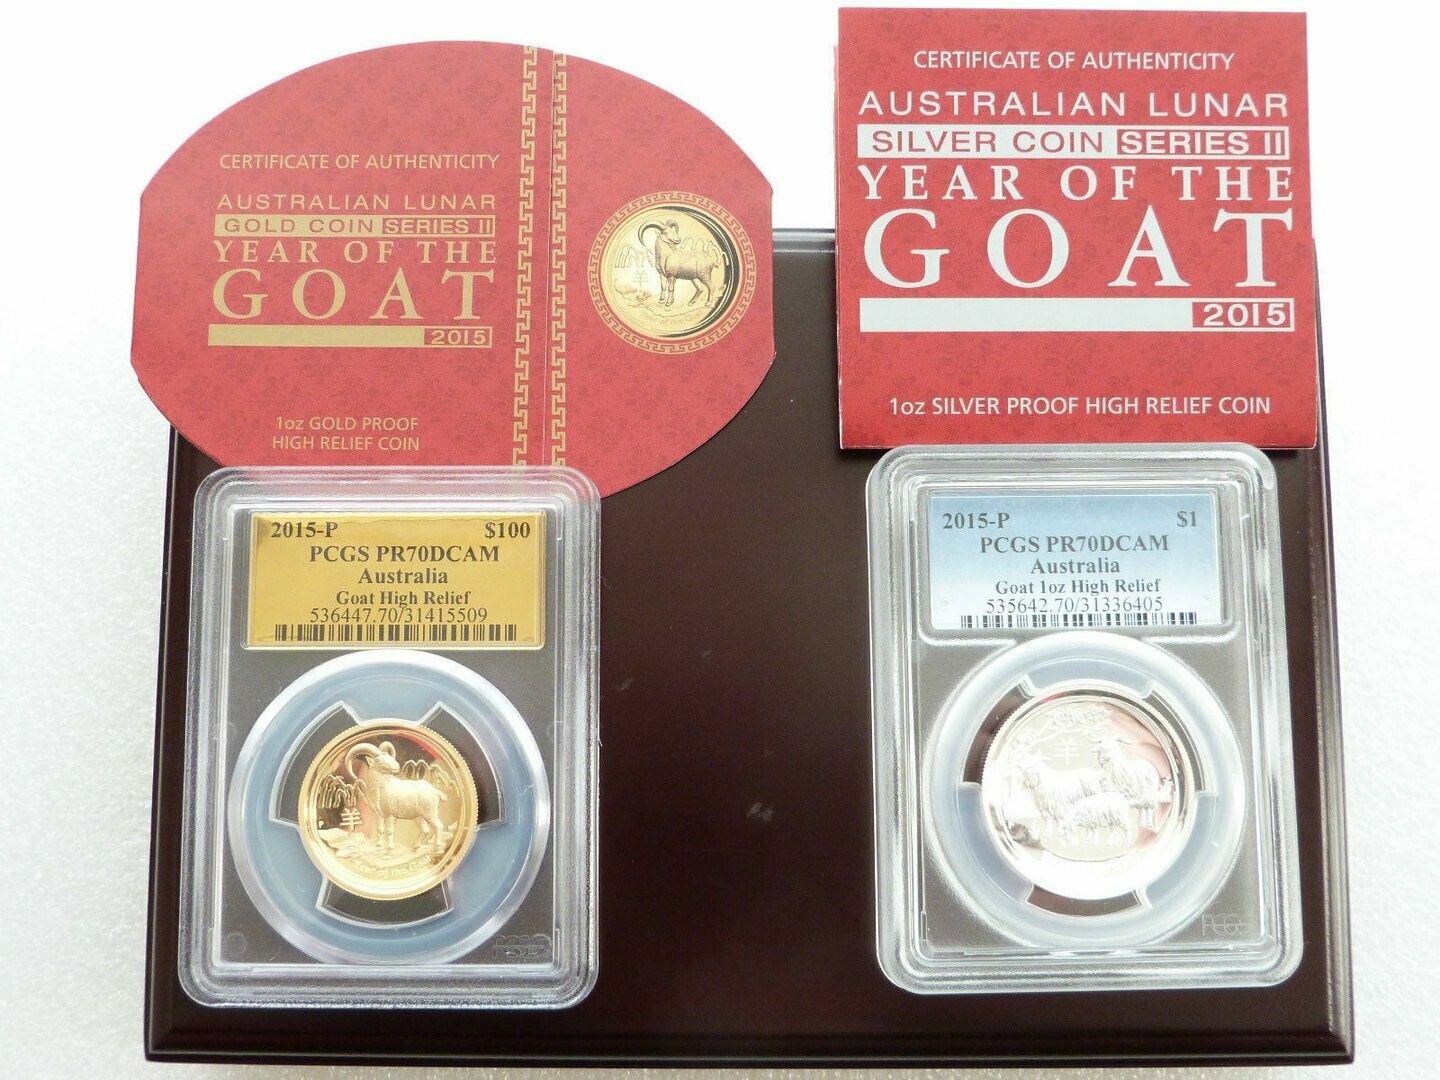 2015-P Australia Lunar Goat High Relief Gold Proof and Silver Proof 2 Coin Set PCGS PR70 DCAM